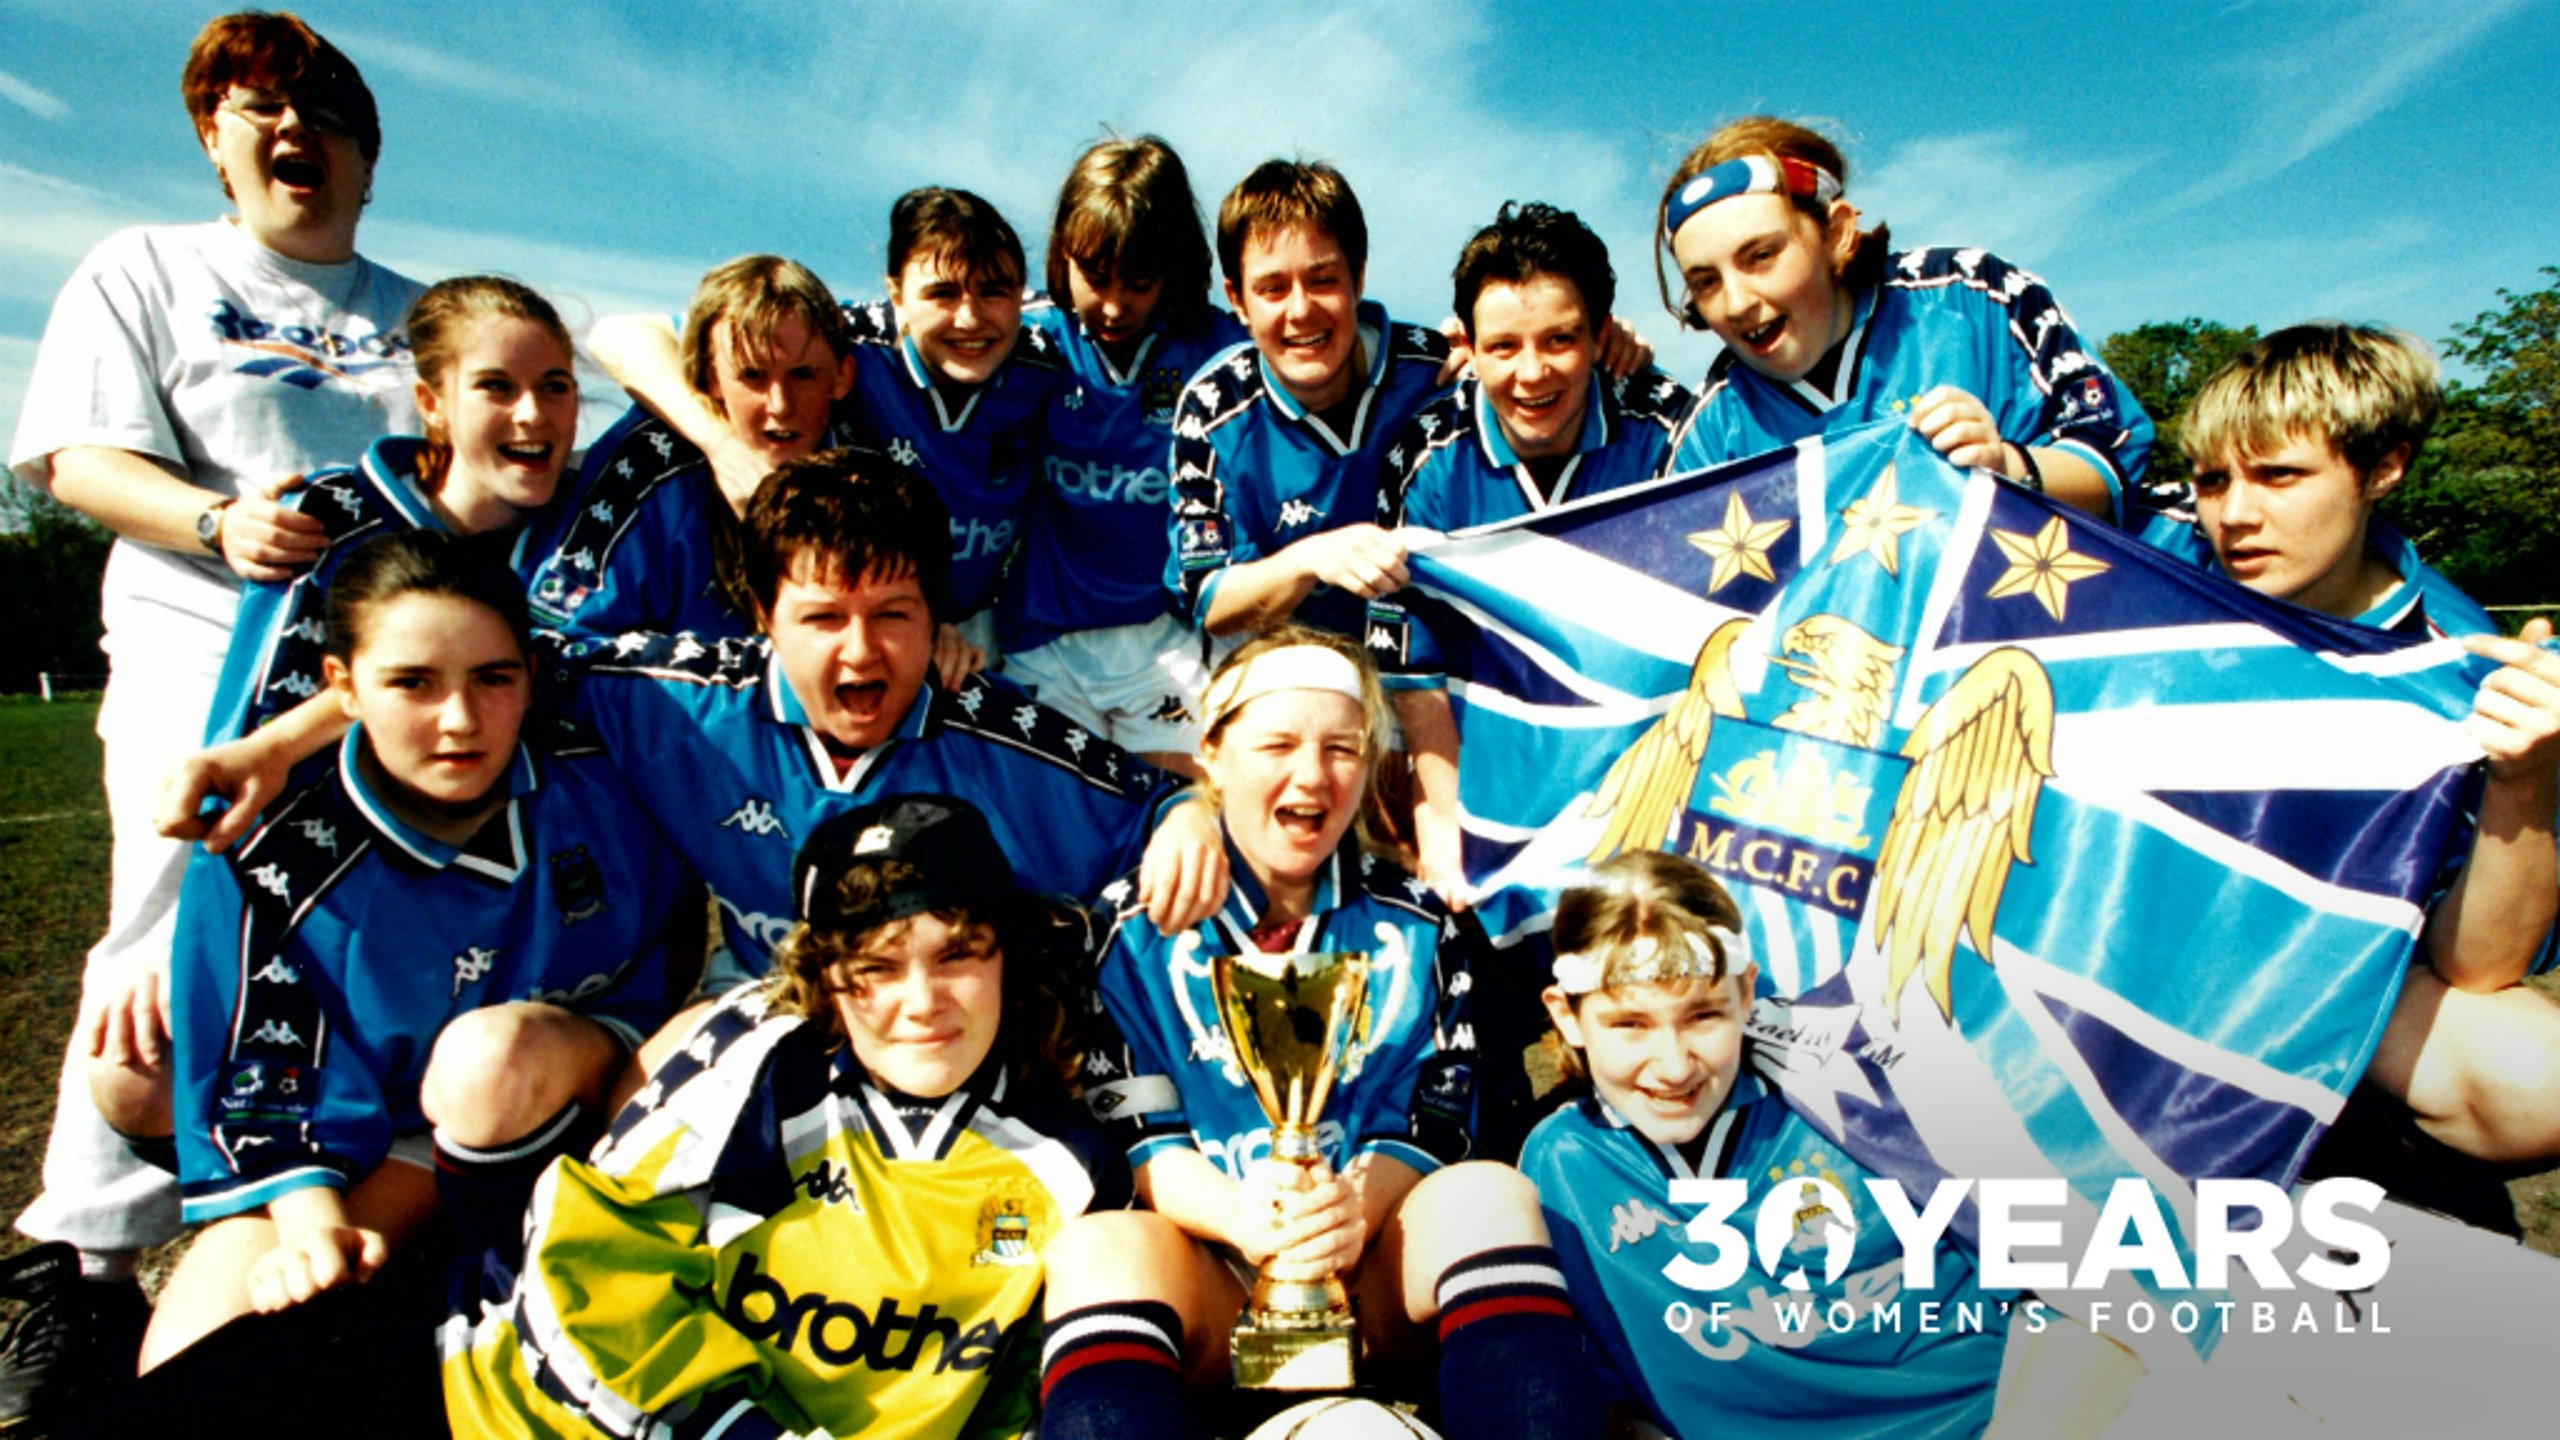 Women's football at City: Through the years...